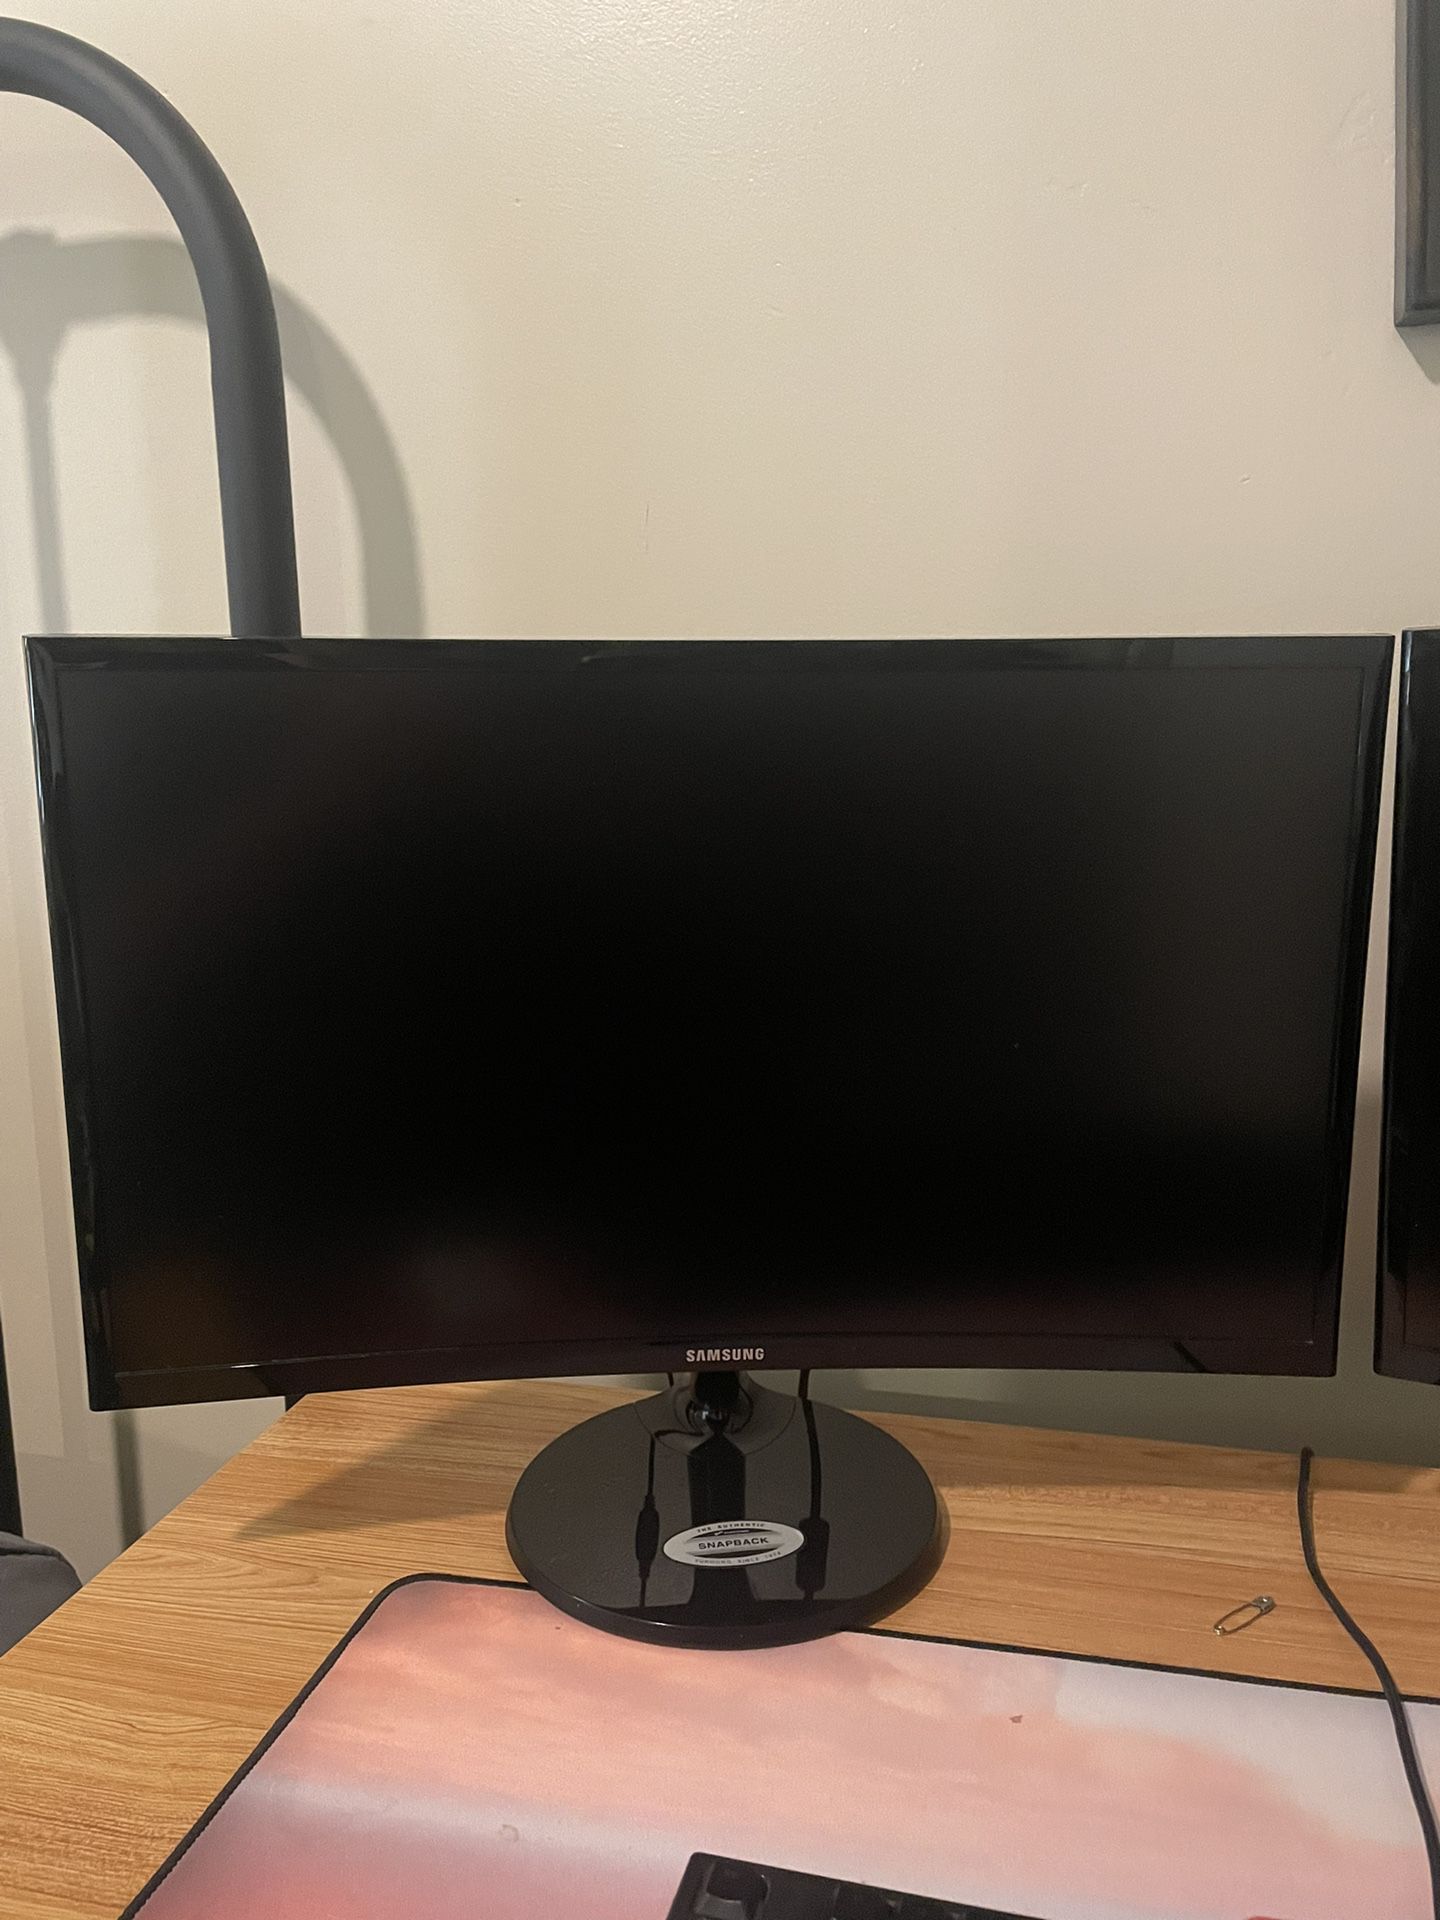 Monitors - Samsung curved 23” (Two of them)